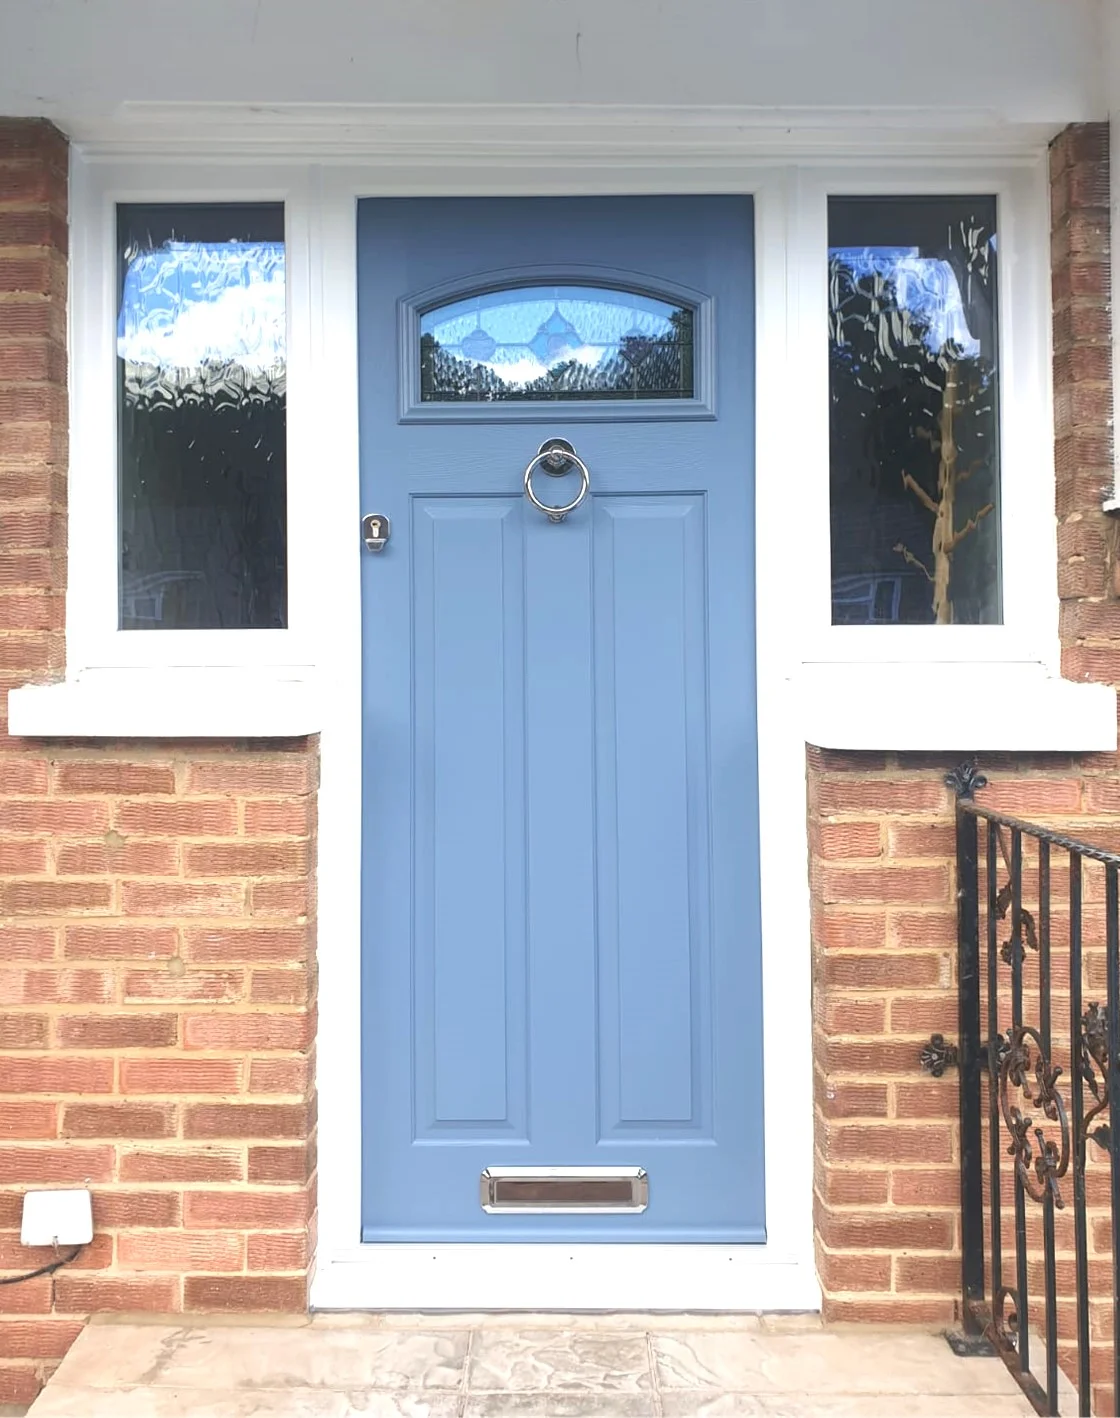 Blue front door with silver finishings including door knocker and letterbox.